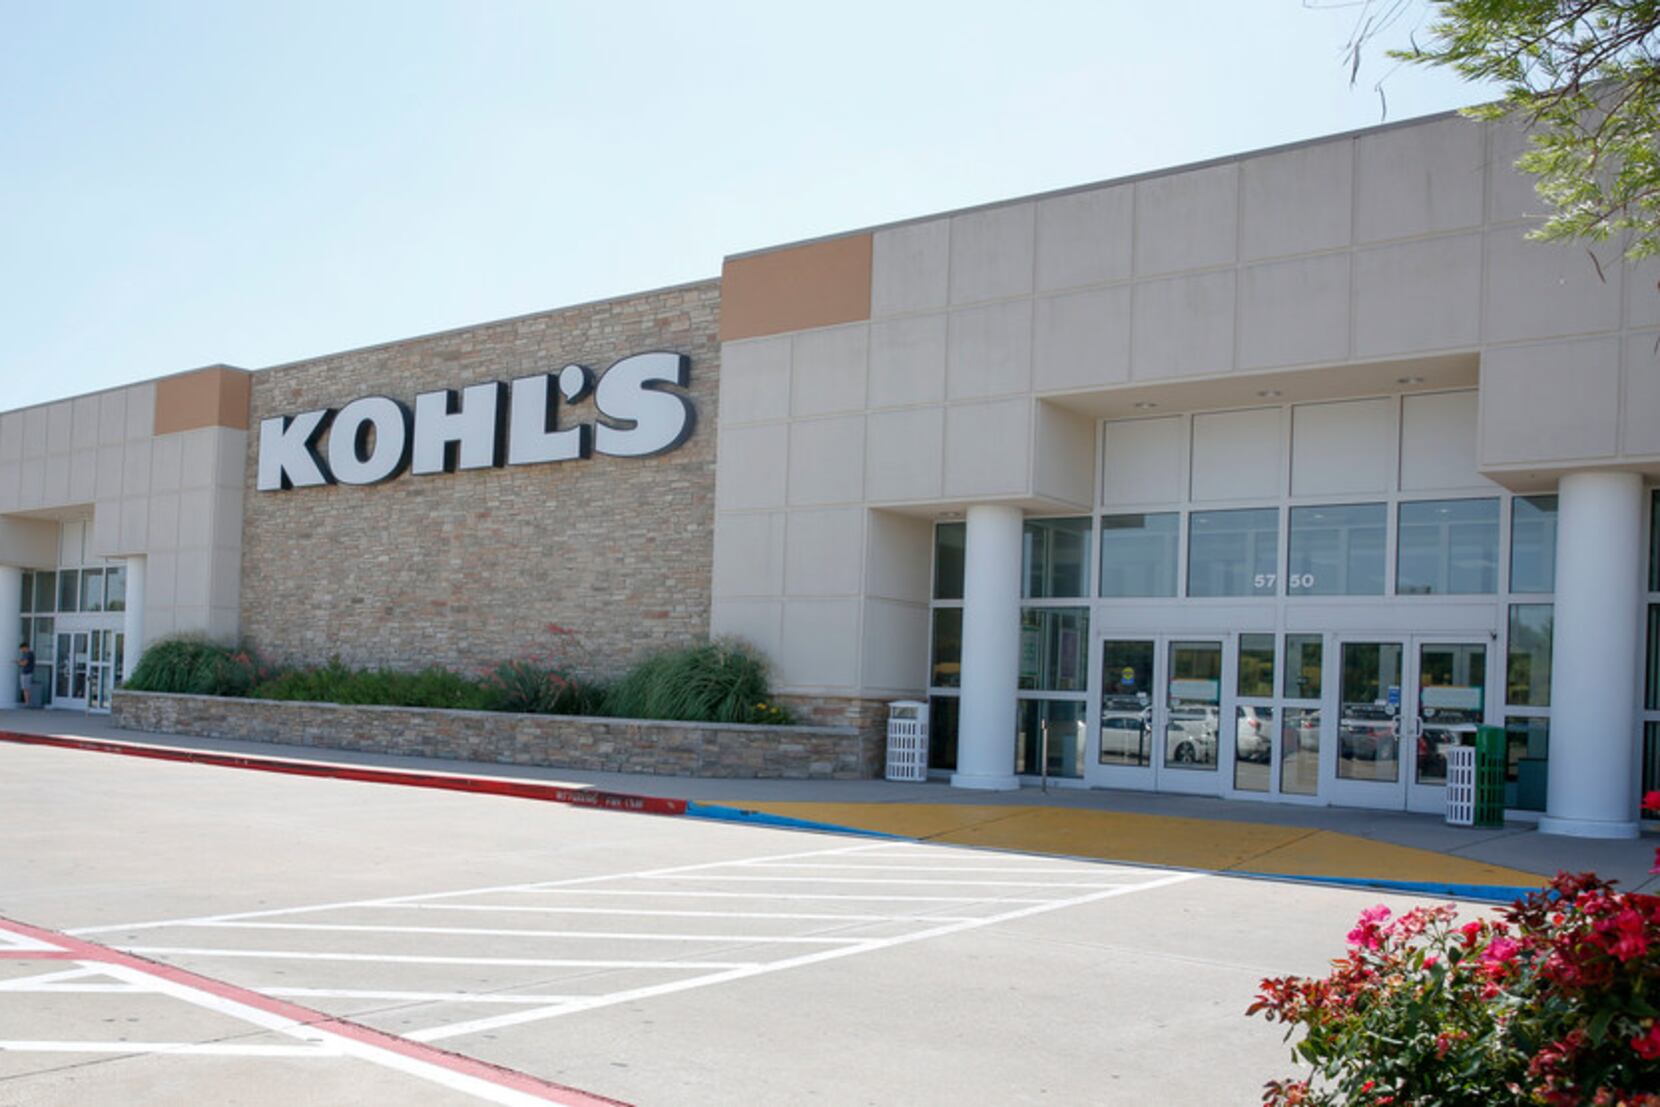 Retail Therapy: Smaller Kohl's coming to Dallas, Pottery Barn Outlet opens  in Arlington and more